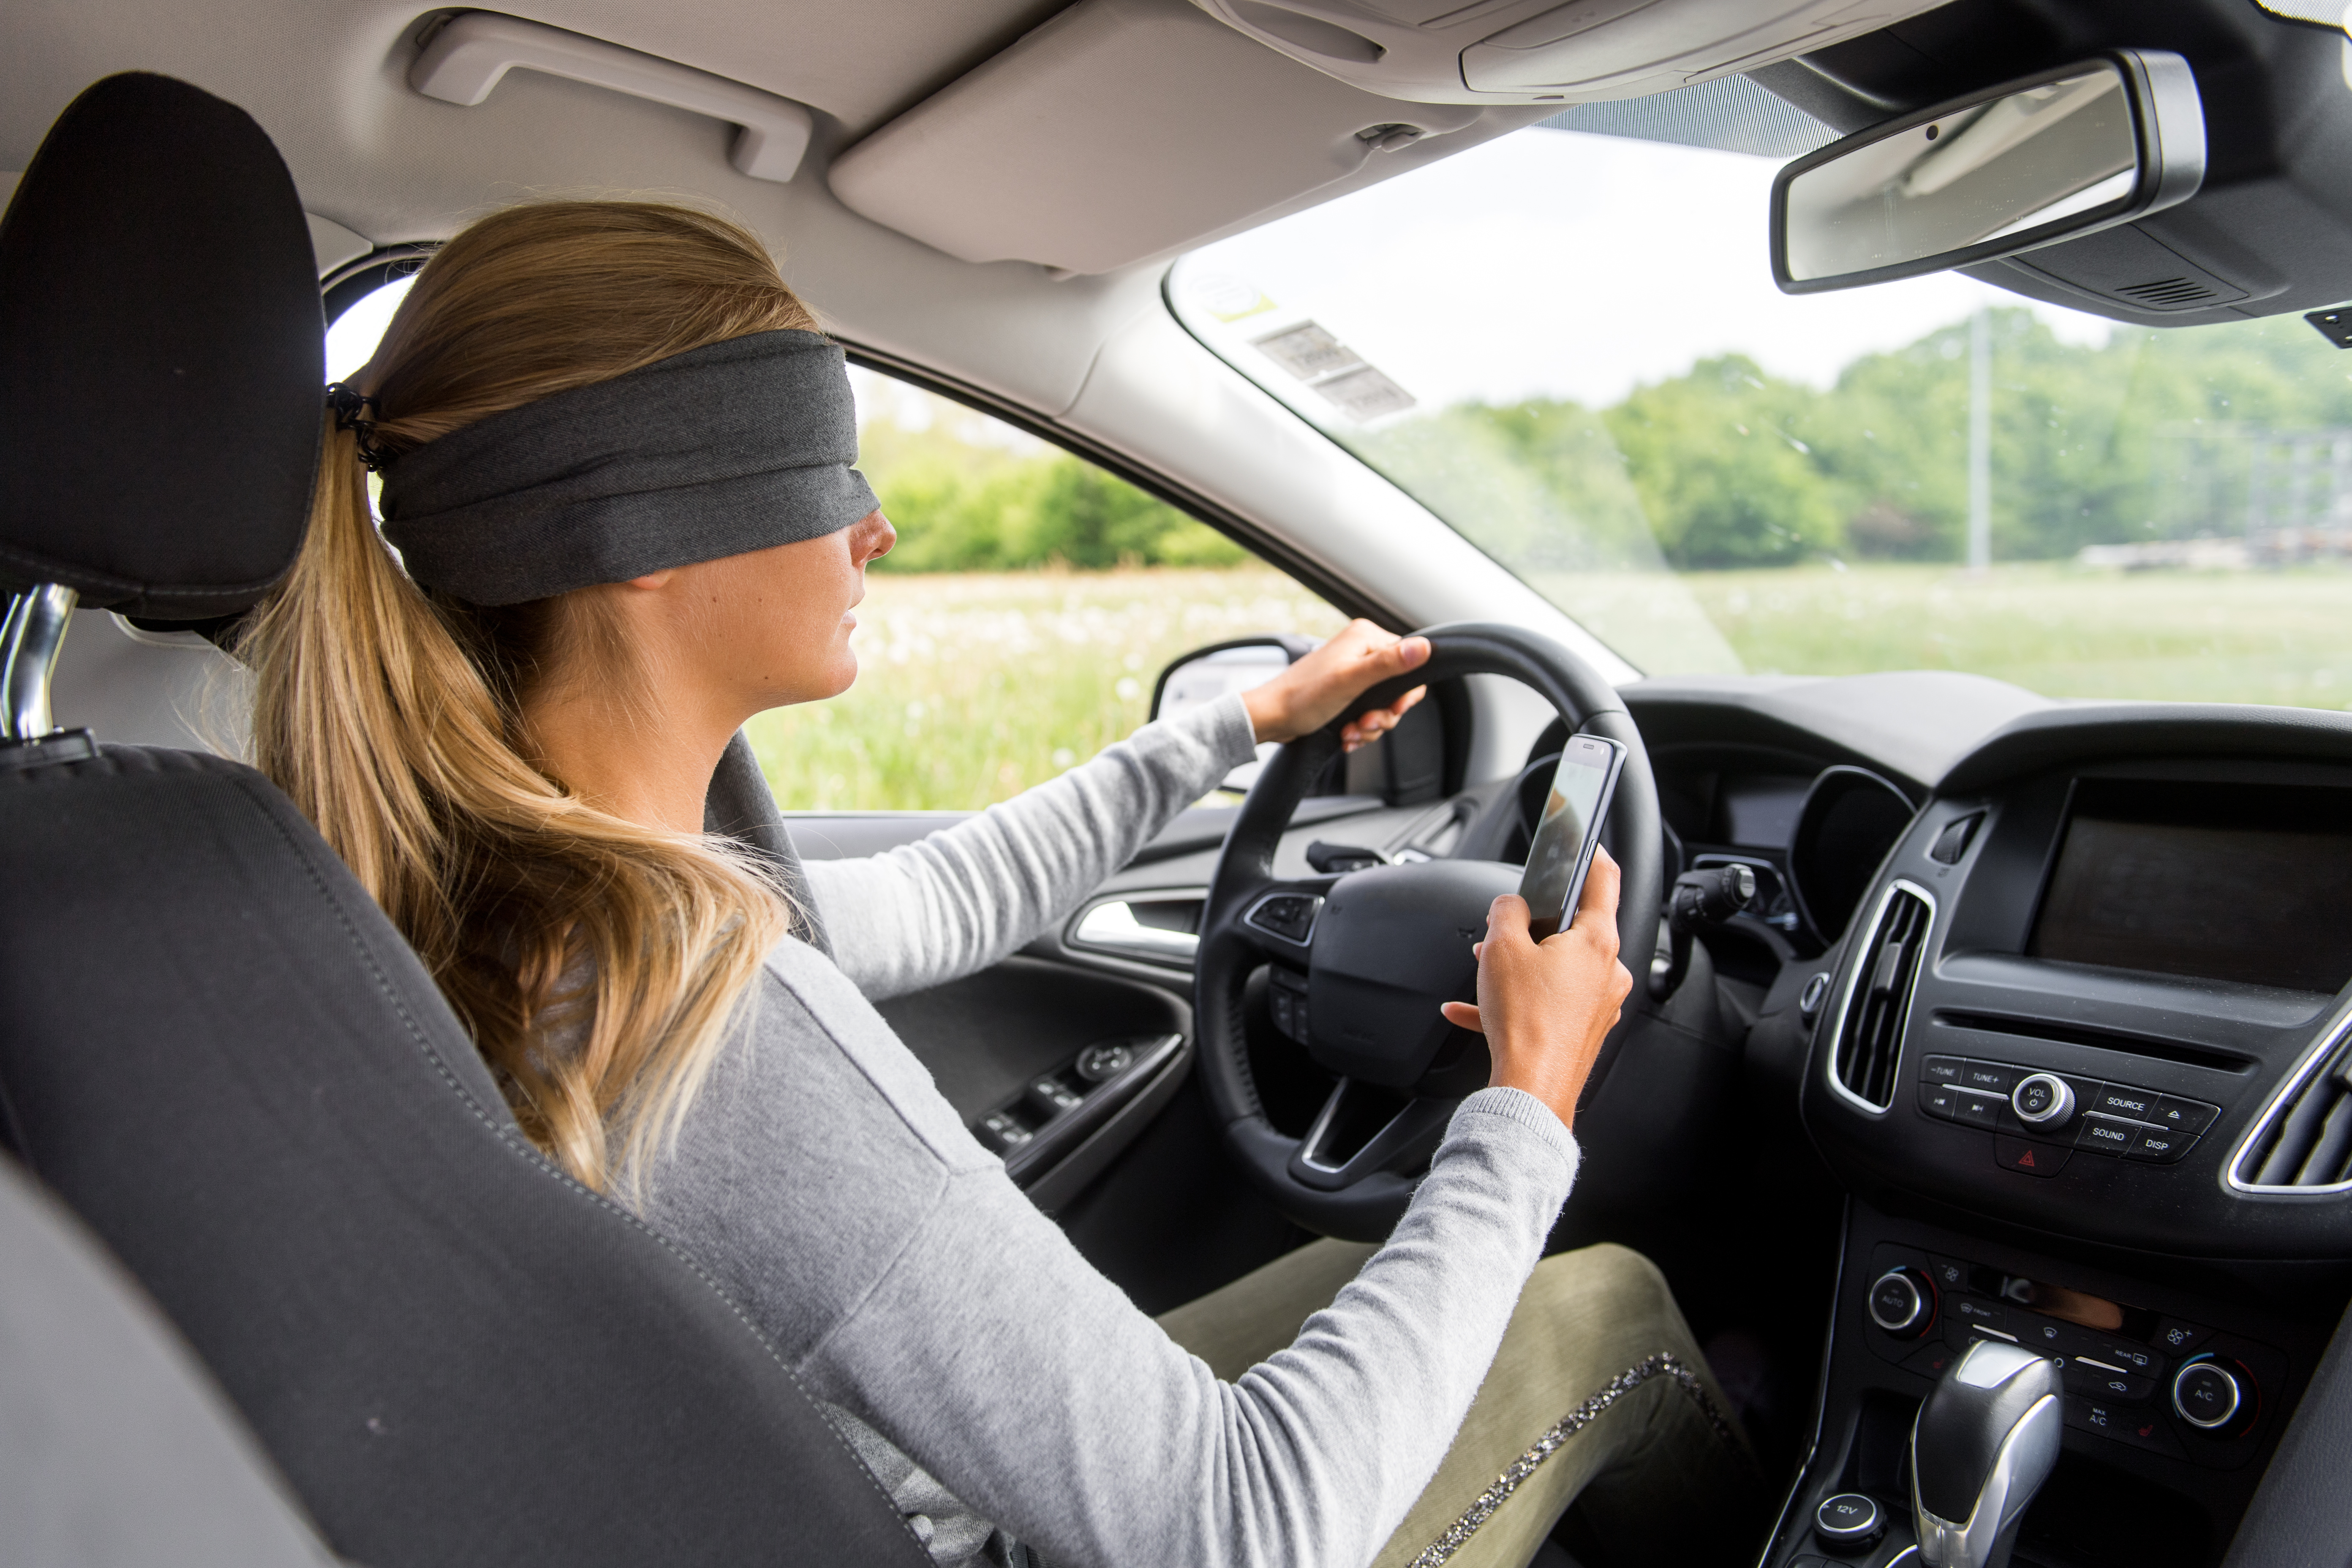 Unanticipated Driver Distractions to be Aware of While Driving